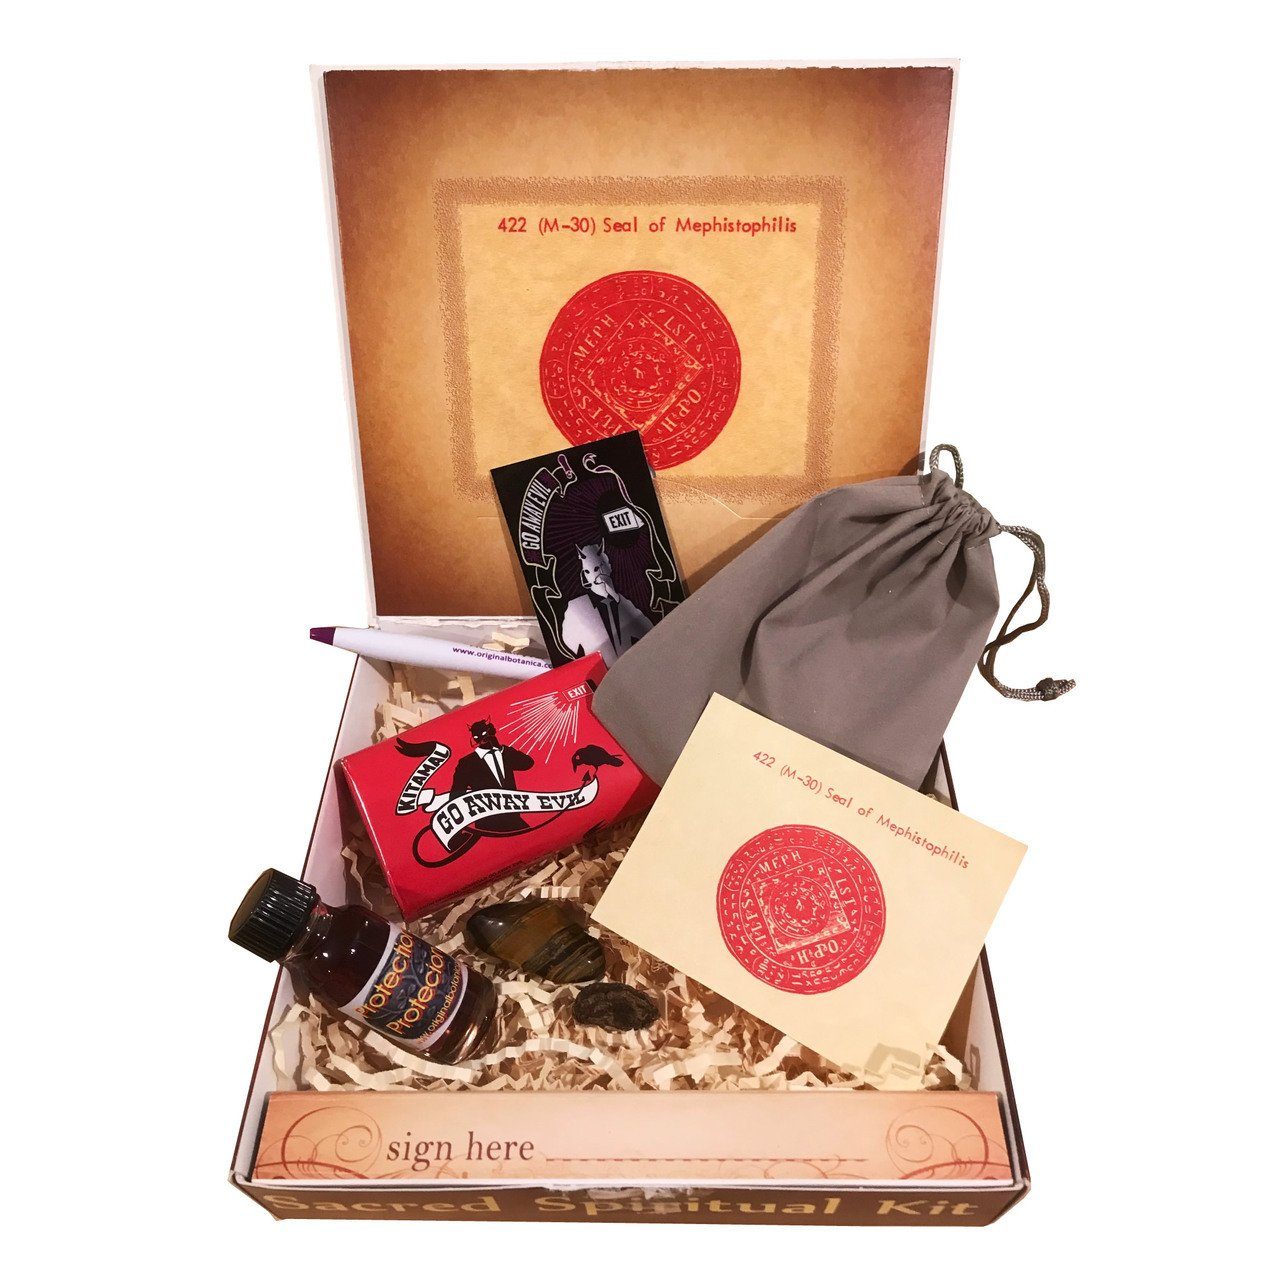 Protection & Peace Kit. Ready to feel safe and protected? Tranquil and secure? Open up the protection and peace kit and close the door on evil and negativity